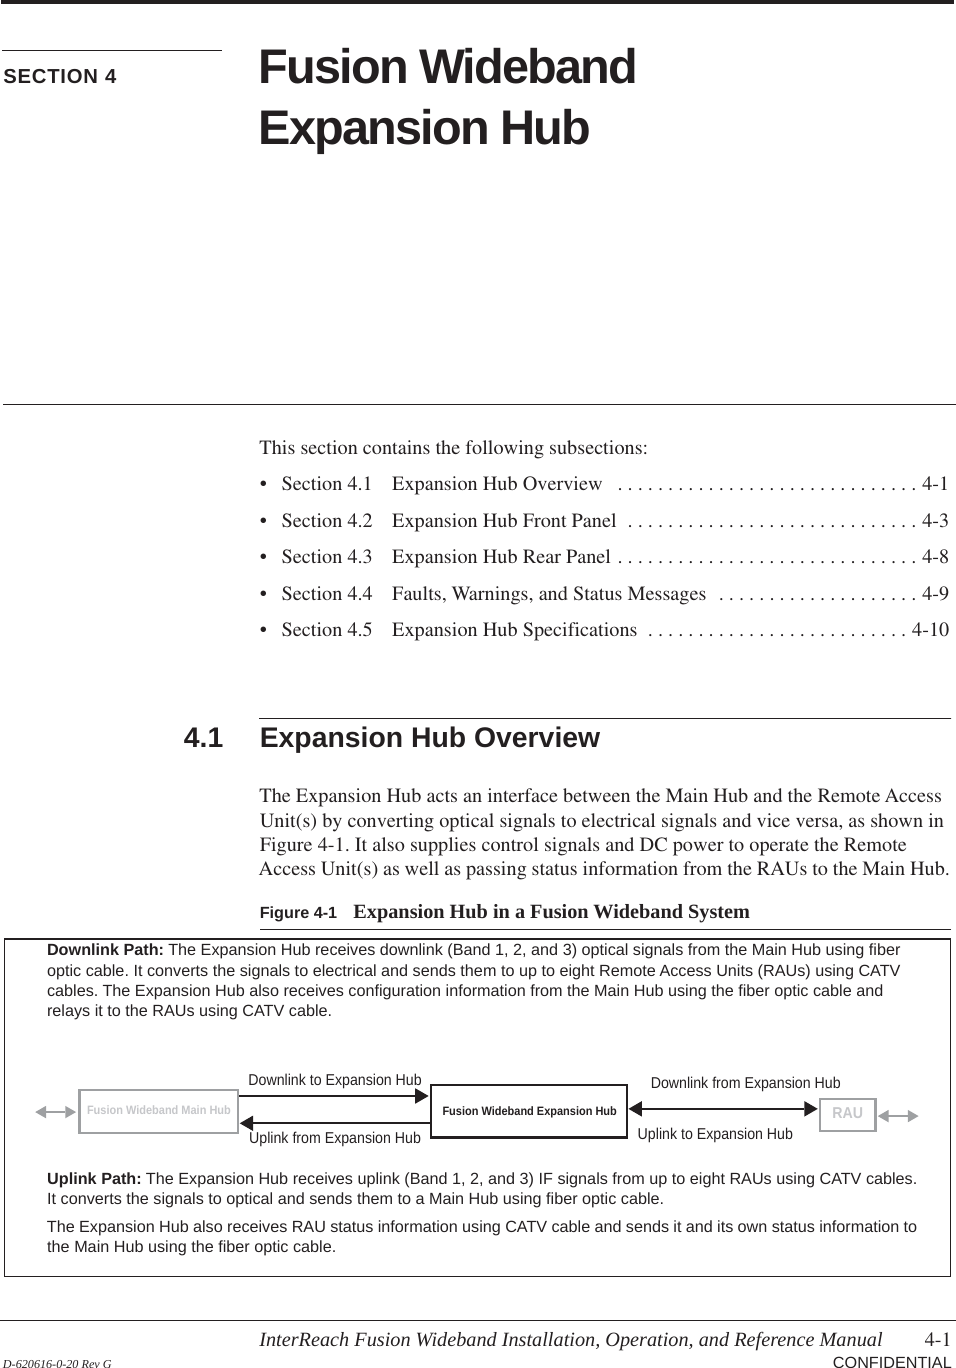 InterReach Fusion Wideband Installation, Operation, and Reference Manual 4-1 D-620616-0-20 Rev G CONFIDENTIALSECTION 4 Fusion Wideband Expansion HubThis section contains the following subsections:• Section  4.1   Expansion Hub Overview   . . . . . . . . . . . . . . . . . . . . . . . . . . . . . . 4-1• Section  4.2   Expansion Hub Front Panel  . . . . . . . . . . . . . . . . . . . . . . . . . . . . . 4-3• Section  4.3   Expansion Hub Rear Panel . . . . . . . . . . . . . . . . . . . . . . . . . . . . . . 4-8• Section  4.4   Faults, Warnings, and Status Messages  . . . . . . . . . . . . . . . . . . . . 4-9• Section  4.5   Expansion Hub Specifications  . . . . . . . . . . . . . . . . . . . . . . . . . . 4-104.1 Expansion Hub OverviewThe Expansion Hub acts an interface between the Main Hub and the Remote Access Unit(s) by converting optical signals to electrical signals and vice versa, as shown in Figure  4-1. It also supplies control signals and DC power to operate the Remote Access Unit(s) as well as passing status information from the RAUs to the Main Hub.Figure 4-1 Expansion Hub in a Fusion Wideband SystemFusion Wideband Expansion HubFusion Wideband Main HubRAUDownlink Path: The Expansion Hub receives downlink (Band 1, 2, and 3) optical signals from the Main Hub using fiber optic cable. It converts the signals to electrical and sends them to up to eight Remote Access Units (RAUs) using CATV cables. The Expansion Hub also receives configuration information from the Main Hub using the fiber optic cable and relays it to the RAUs using CATV cable.Uplink Path: The Expansion Hub receives uplink (Band 1, 2, and 3) IF signals from up to eight RAUs using CATV cables. It converts the signals to optical and sends them to a Main Hub using fiber optic cable.The Expansion Hub also receives RAU status information using CATV cable and sends it and its own status information to the Main Hub using the fiber optic cable.Downlink to Expansion HubUplink from Expansion HubDownlink from Expansion HubUplink to Expansion Hub